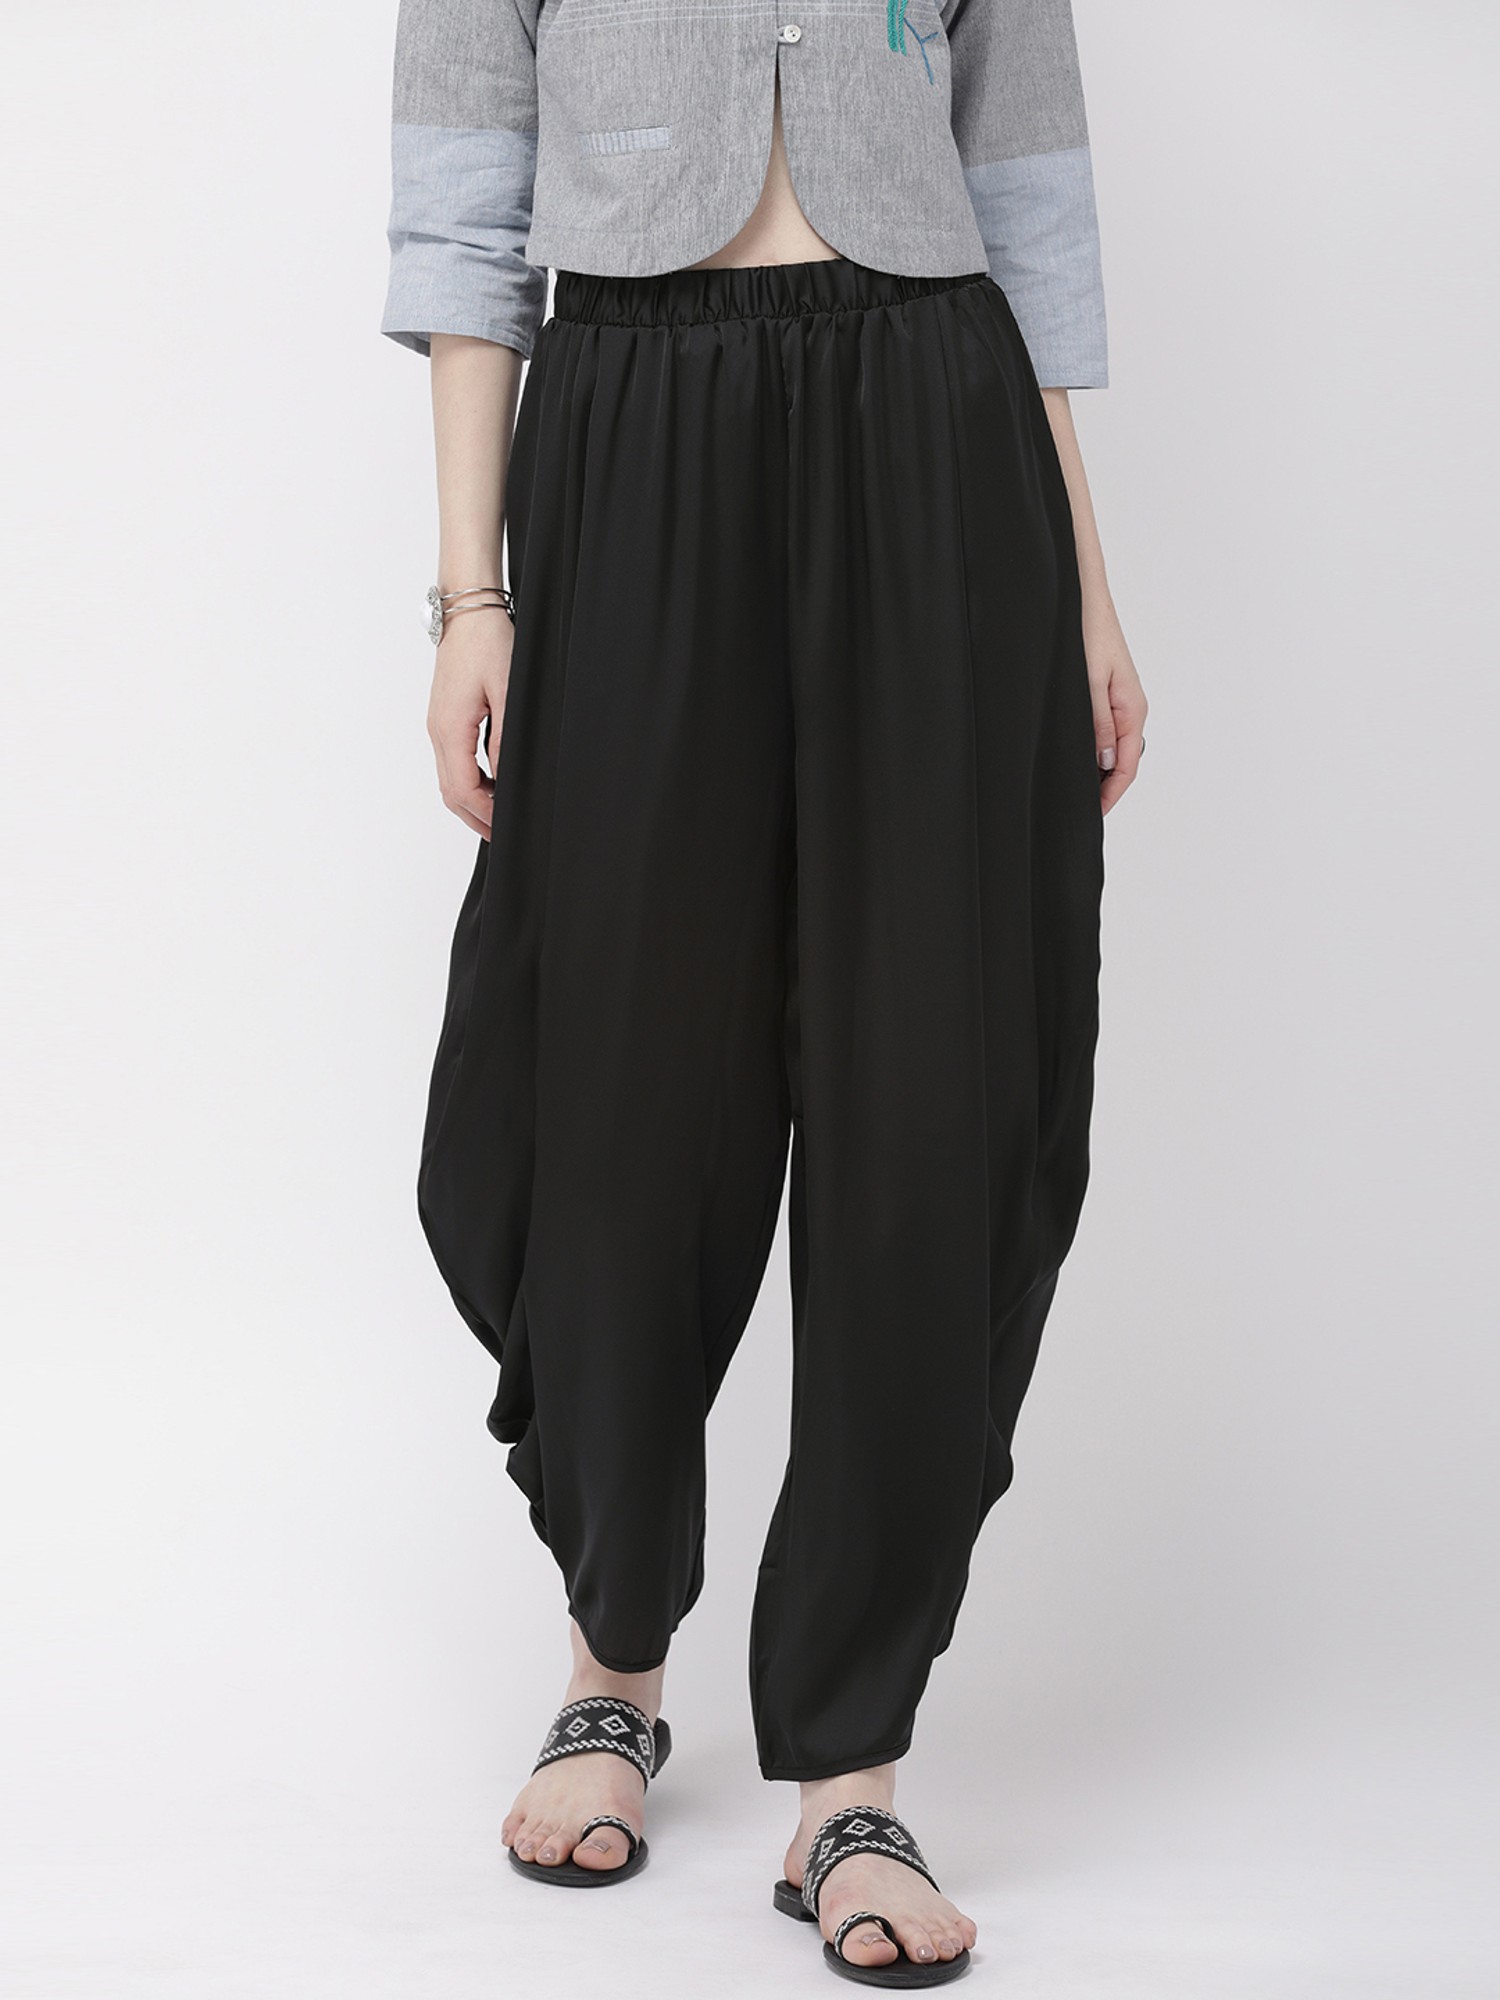 Buy Go Colors Black Solid Dhoti Pants - Dhotis for Women 4891823 | Myntra